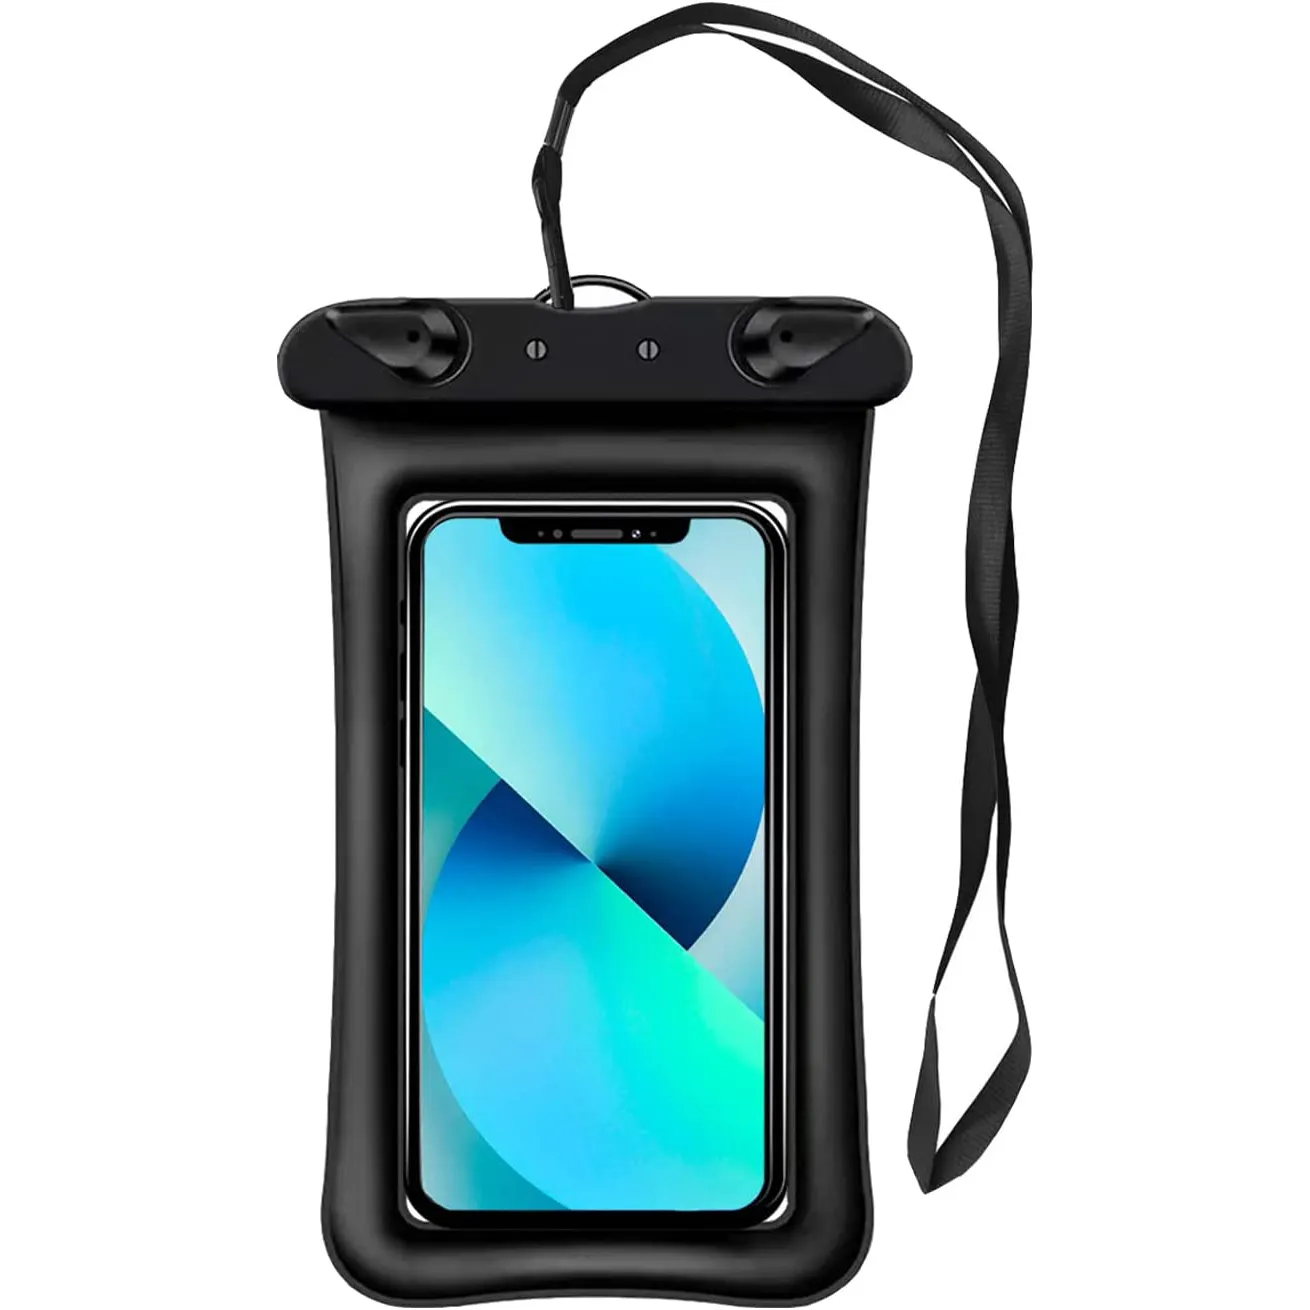 PVC Waterproof Phone Case Pouch Dry Bag for Swimming Compatible with iPhone 11 12 13 Mini Pro Max XS XR X Galaxy S10 S9